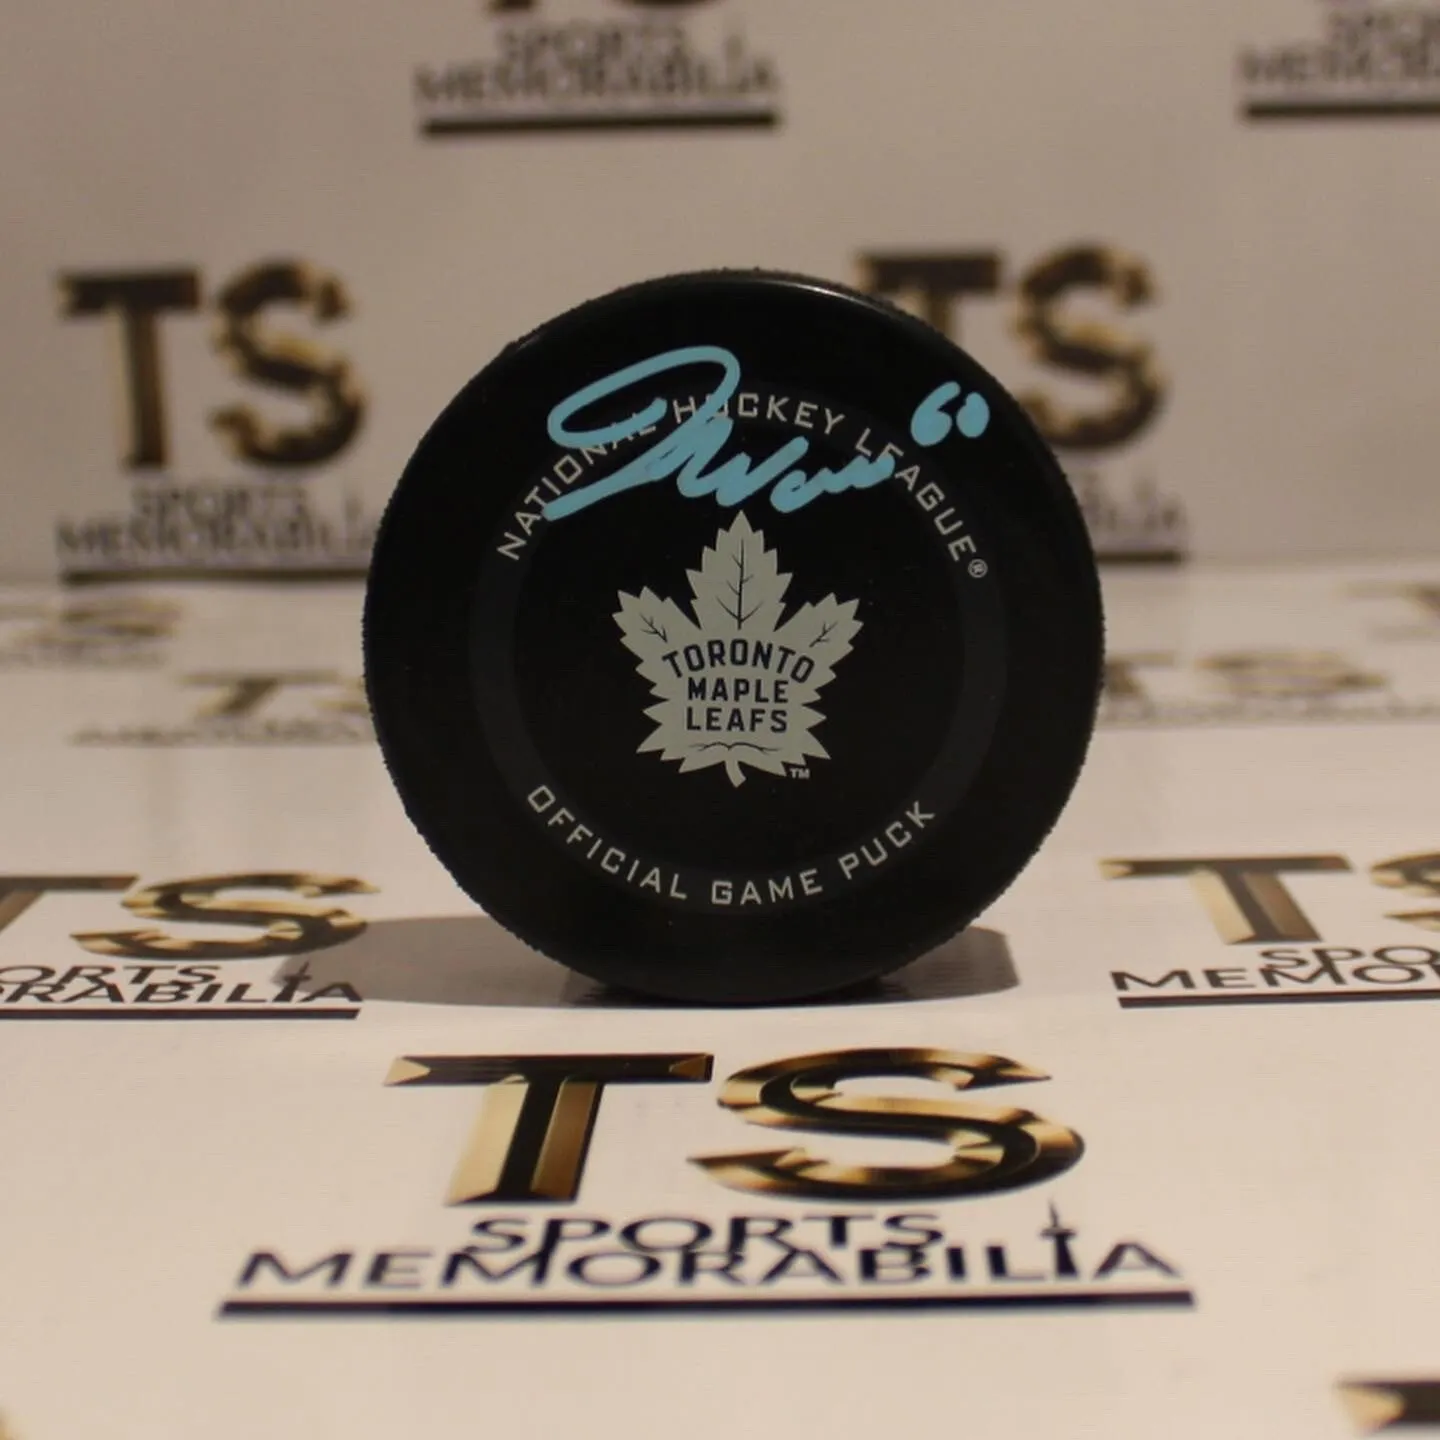 Joseph Woll Signed Autographed Toronto Maple Leafs Official Game Puck